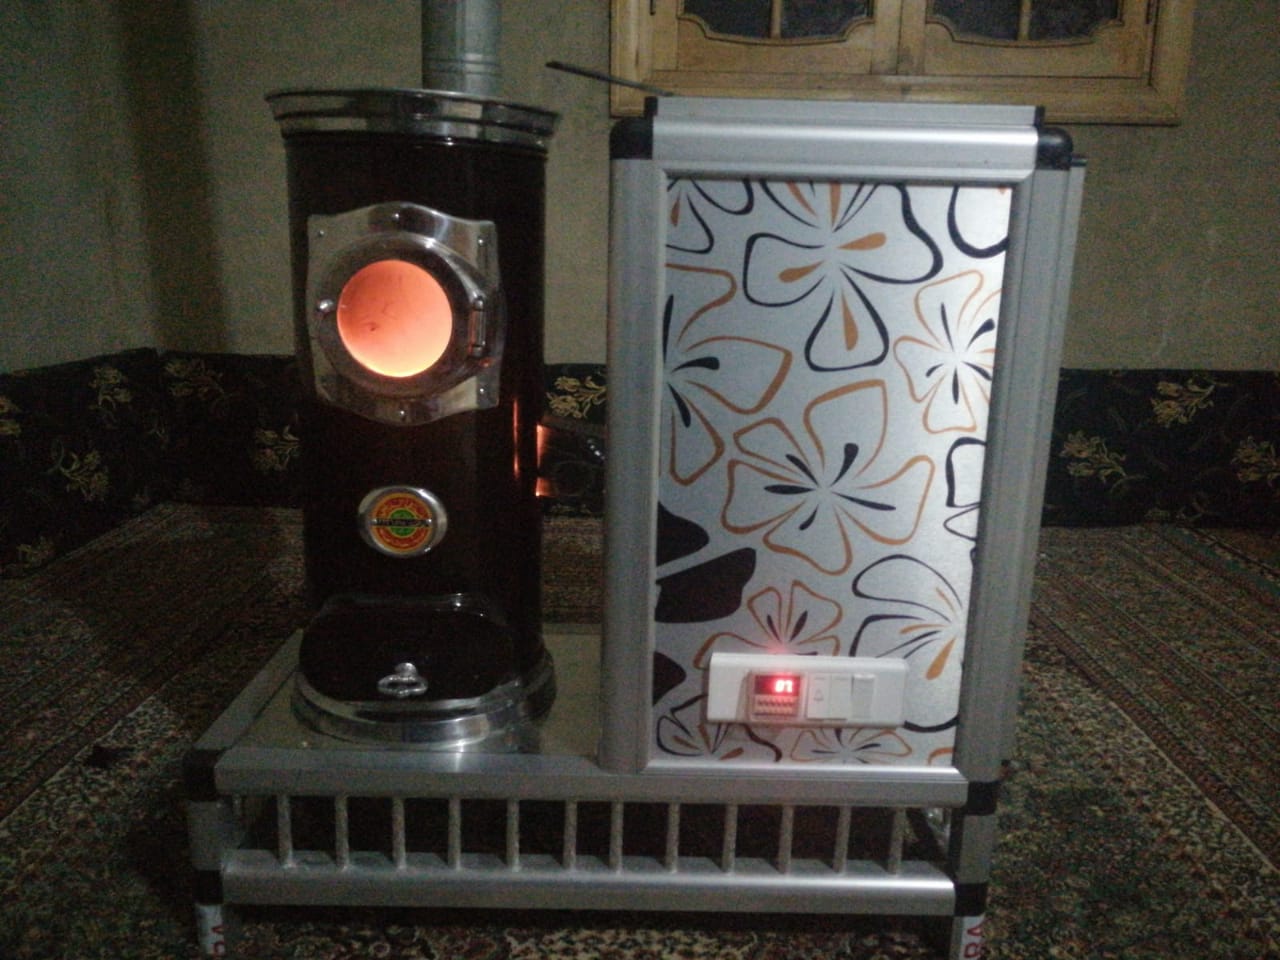 Hussein Ahmed keeps his home warm by burning pistachio shells in this specialized oven (MEE/Hussein Ahmed)